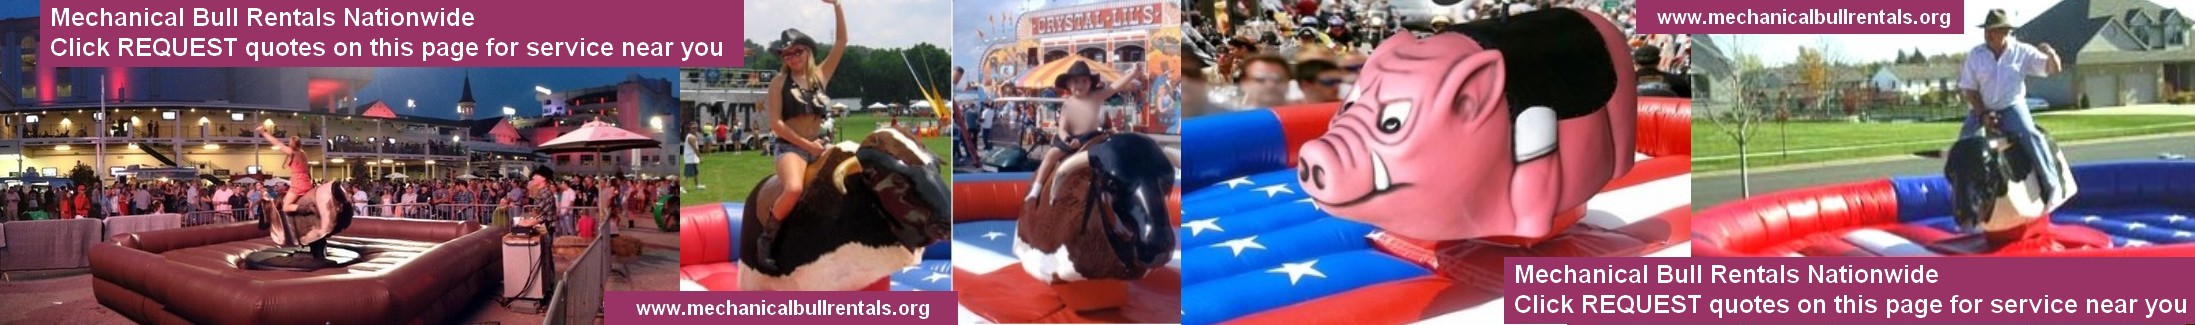 Mechanical Bull Rentals Bay City Texas TX and near you. Free referrals to local mechanical bull companies LOGO